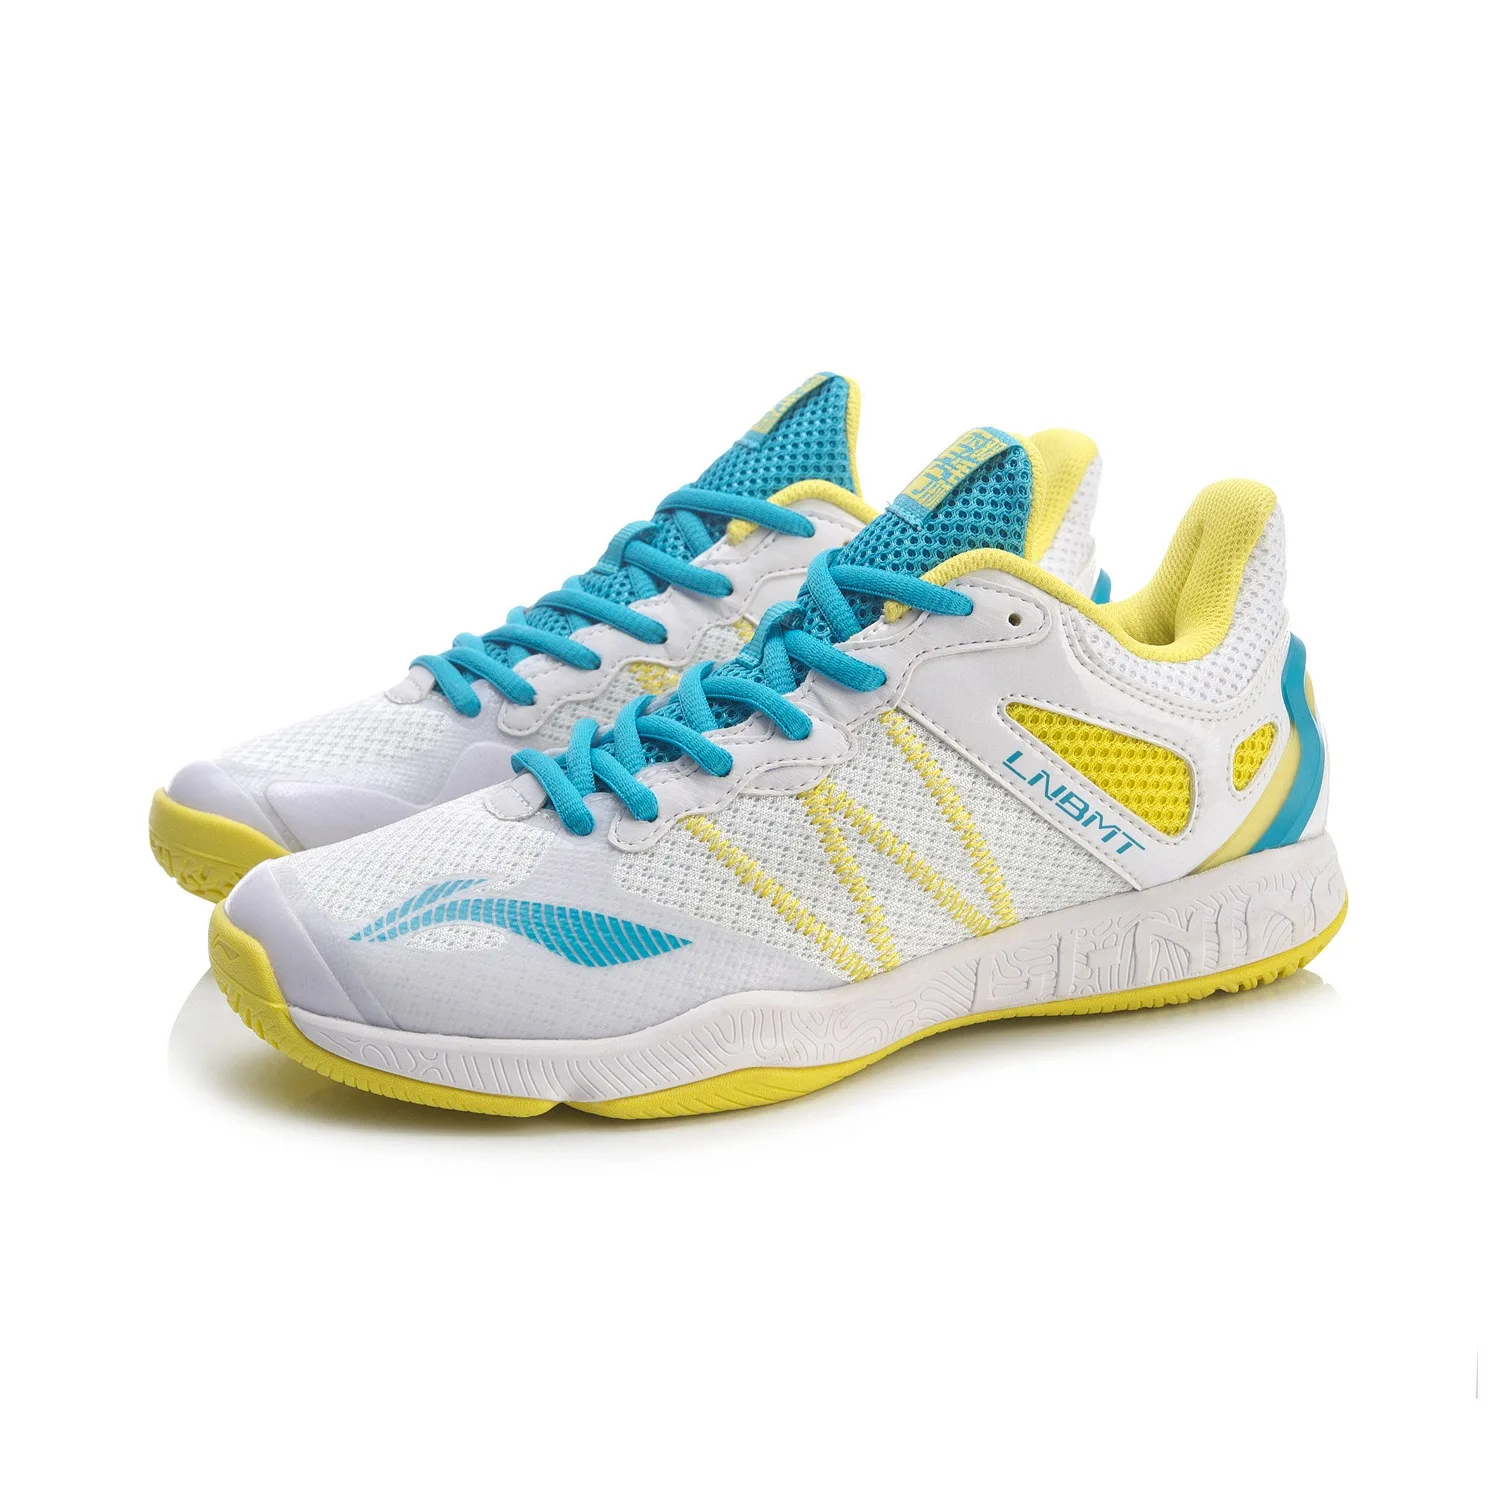 

Li-Ning Women's IV Badminton Shoes Wearable LiNing Sport Training Shoes Support Sneakers casual shoes for lining AYTR014